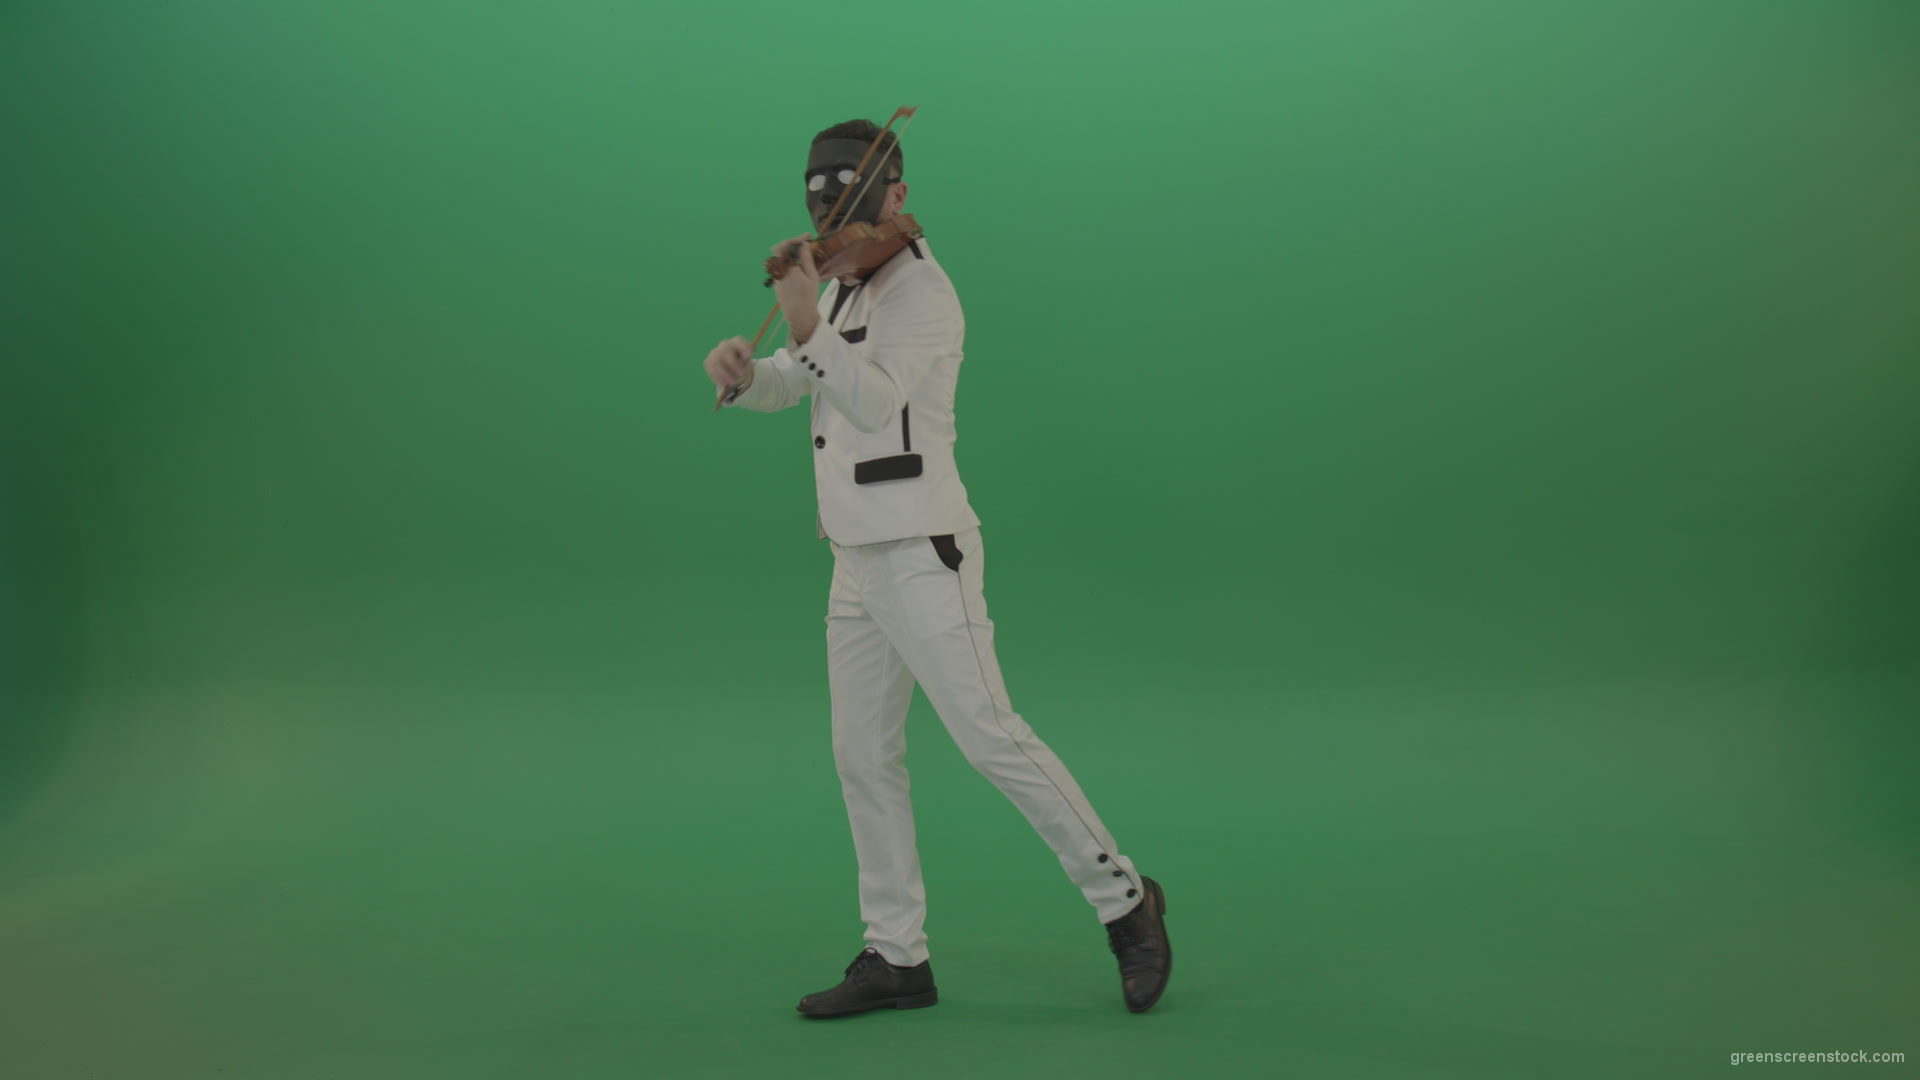 Violinist-in-a-white-jacket-and-in-a-black-mask-with-white-eyes-plays-melodically-on-the-violin_007 Green Screen Stock